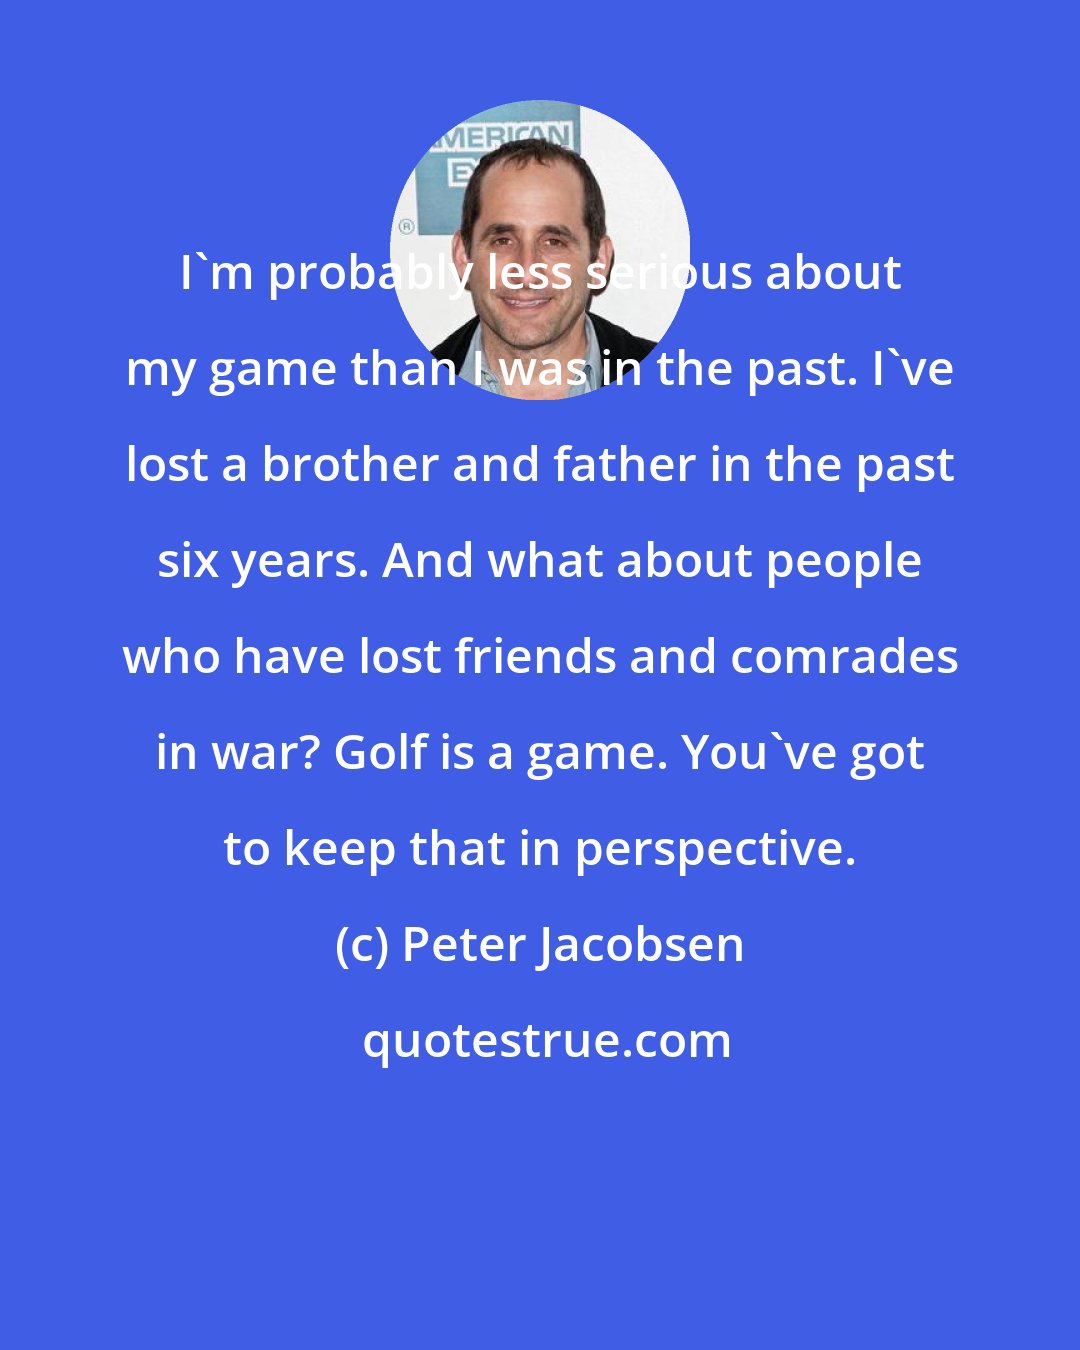 Peter Jacobsen: I'm probably less serious about my game than I was in the past. I've lost a brother and father in the past six years. And what about people who have lost friends and comrades in war? Golf is a game. You've got to keep that in perspective.